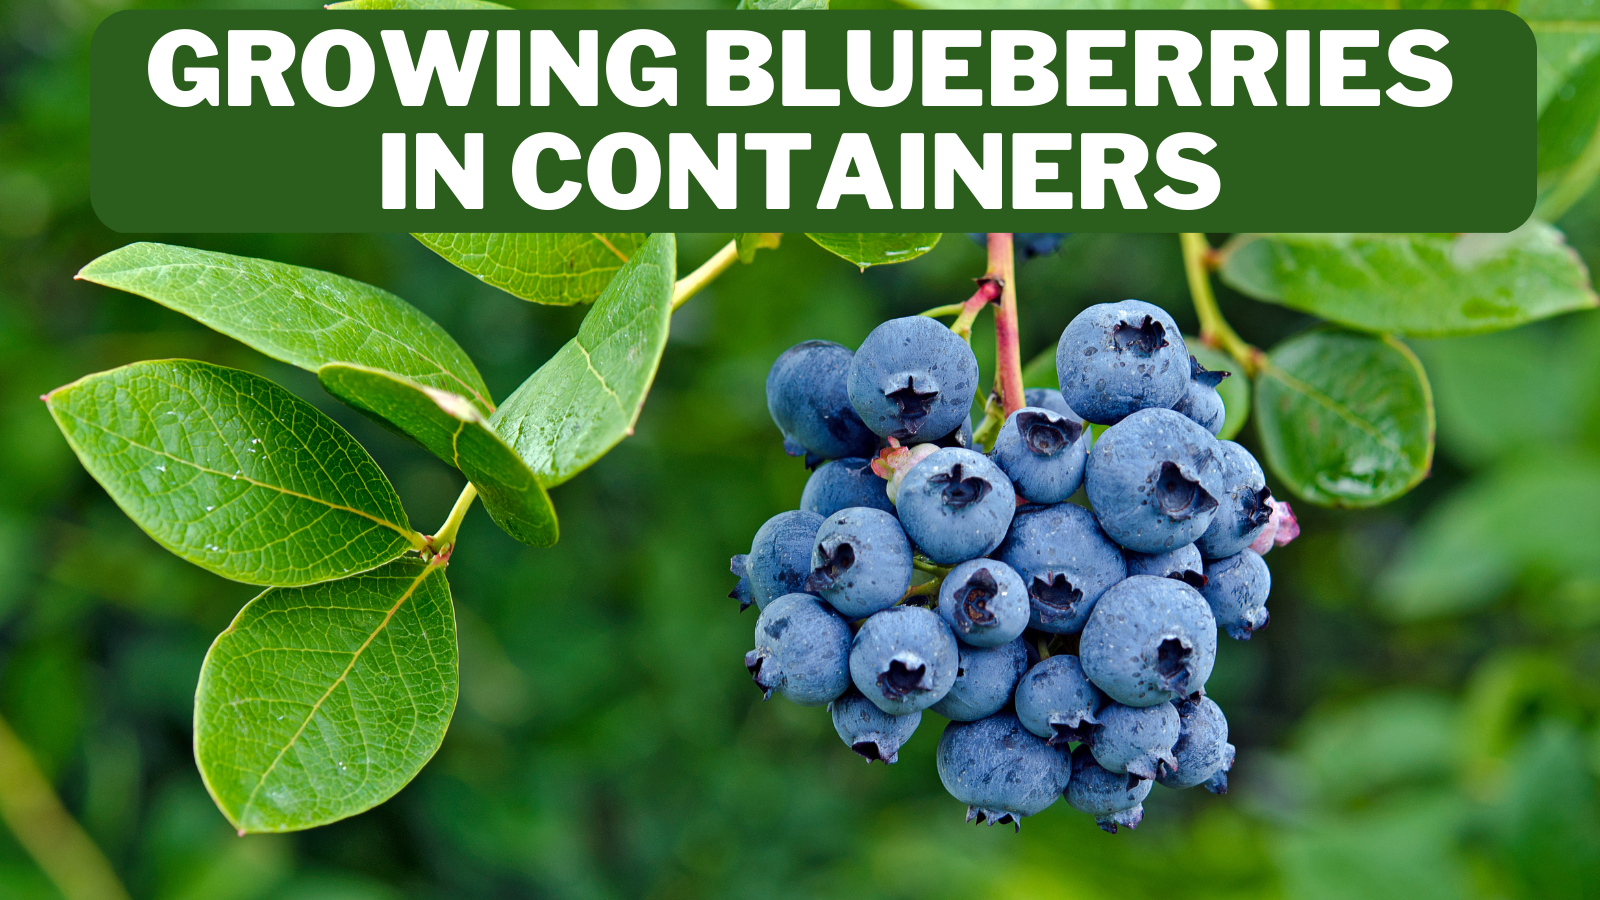 10 Steps To Growing Blueberries In Containers